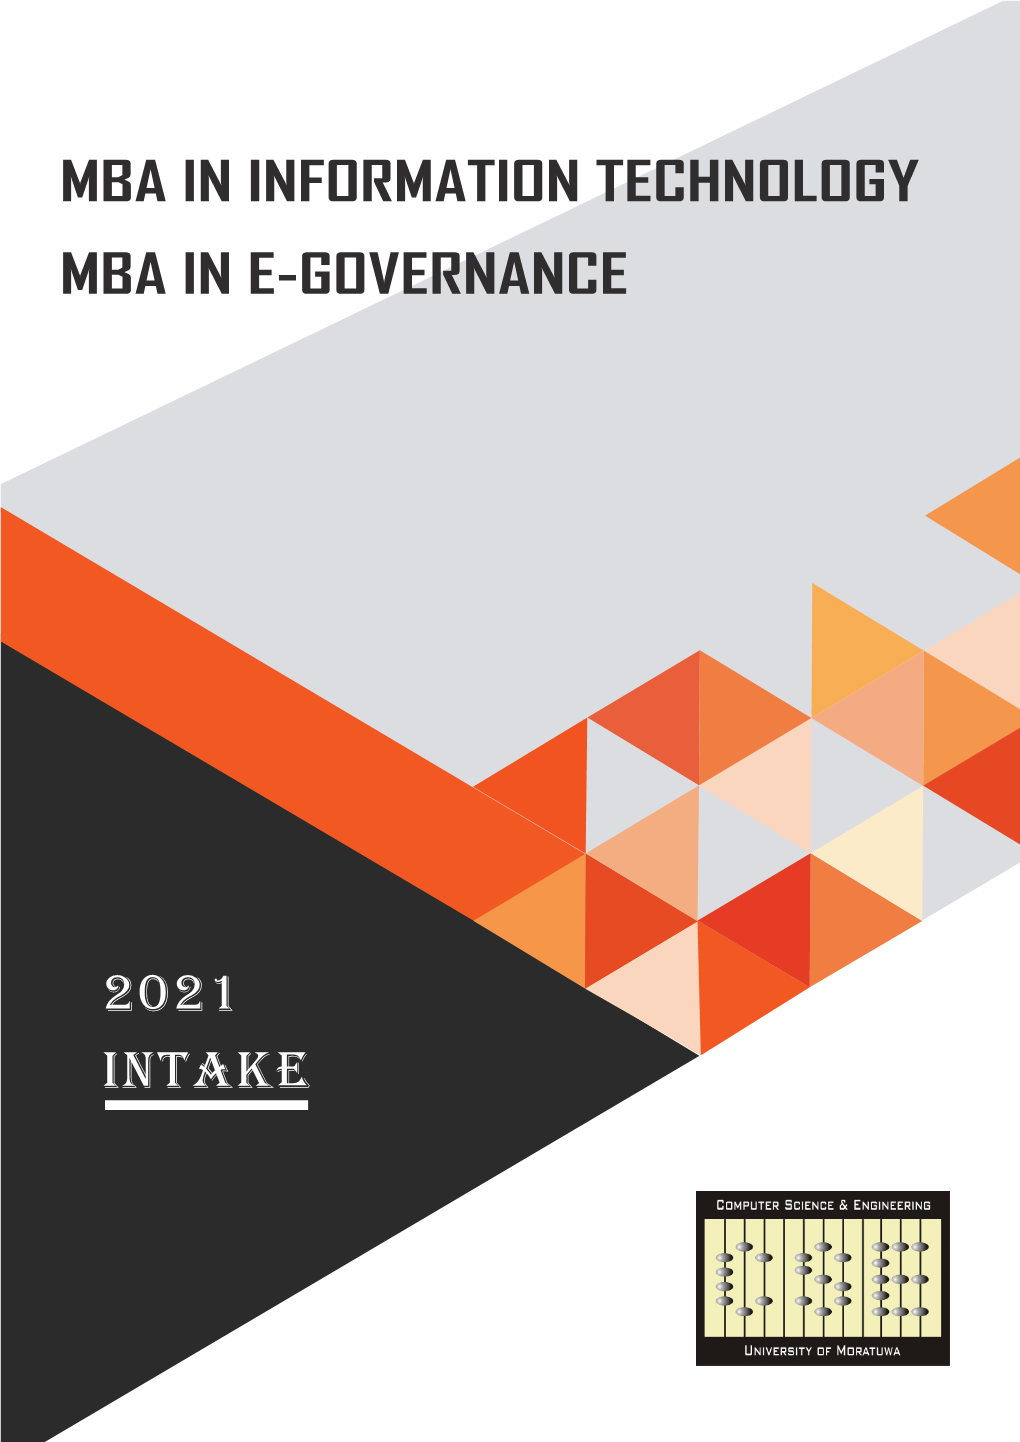 Mba in Information Technology Mba in E-Governance